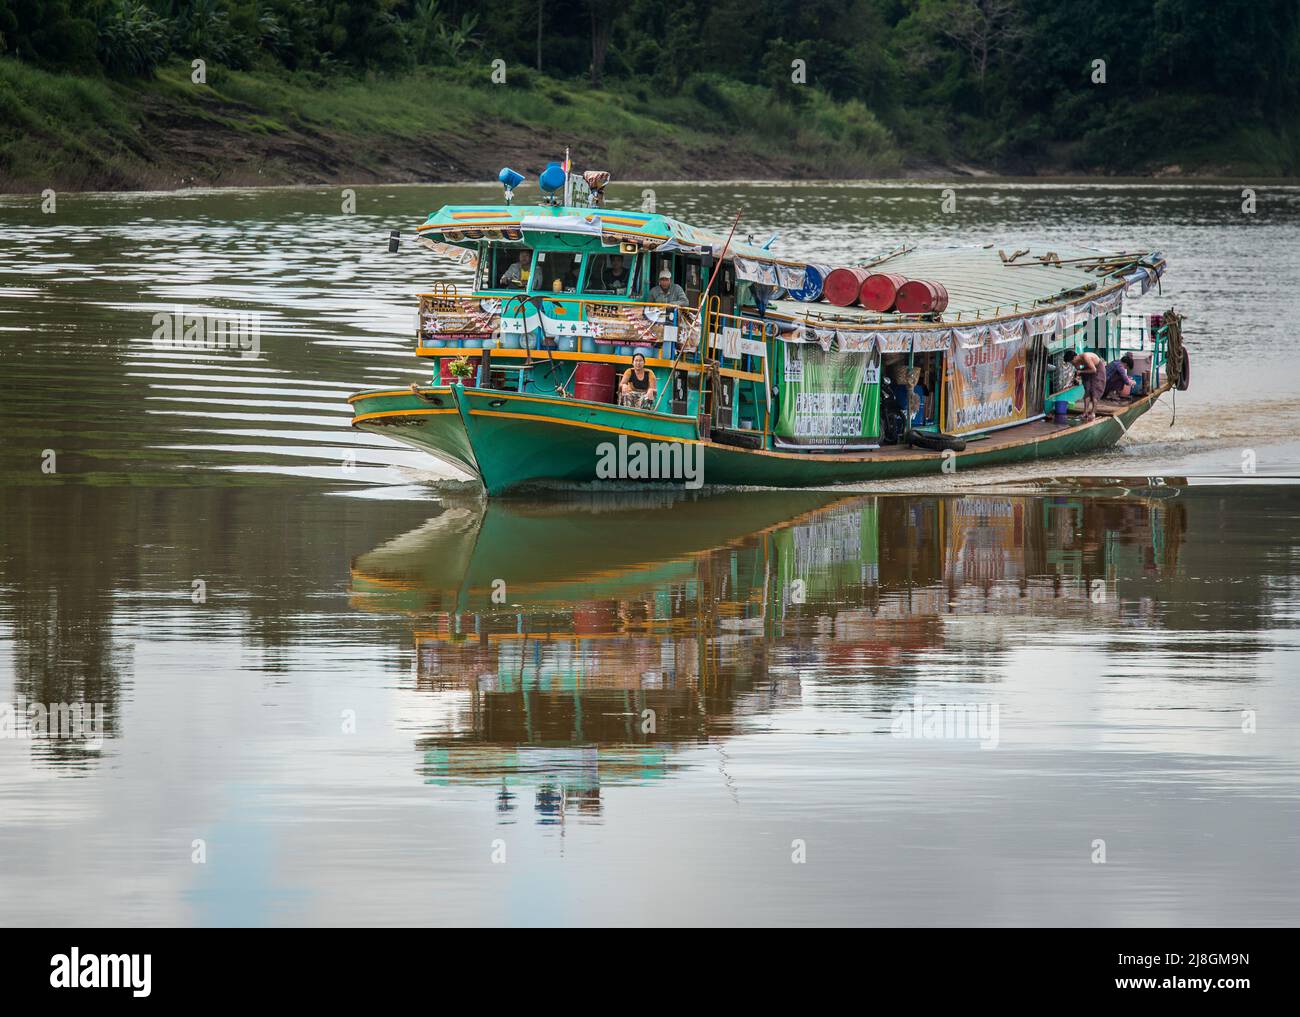 Transport on the River. Stock Photo